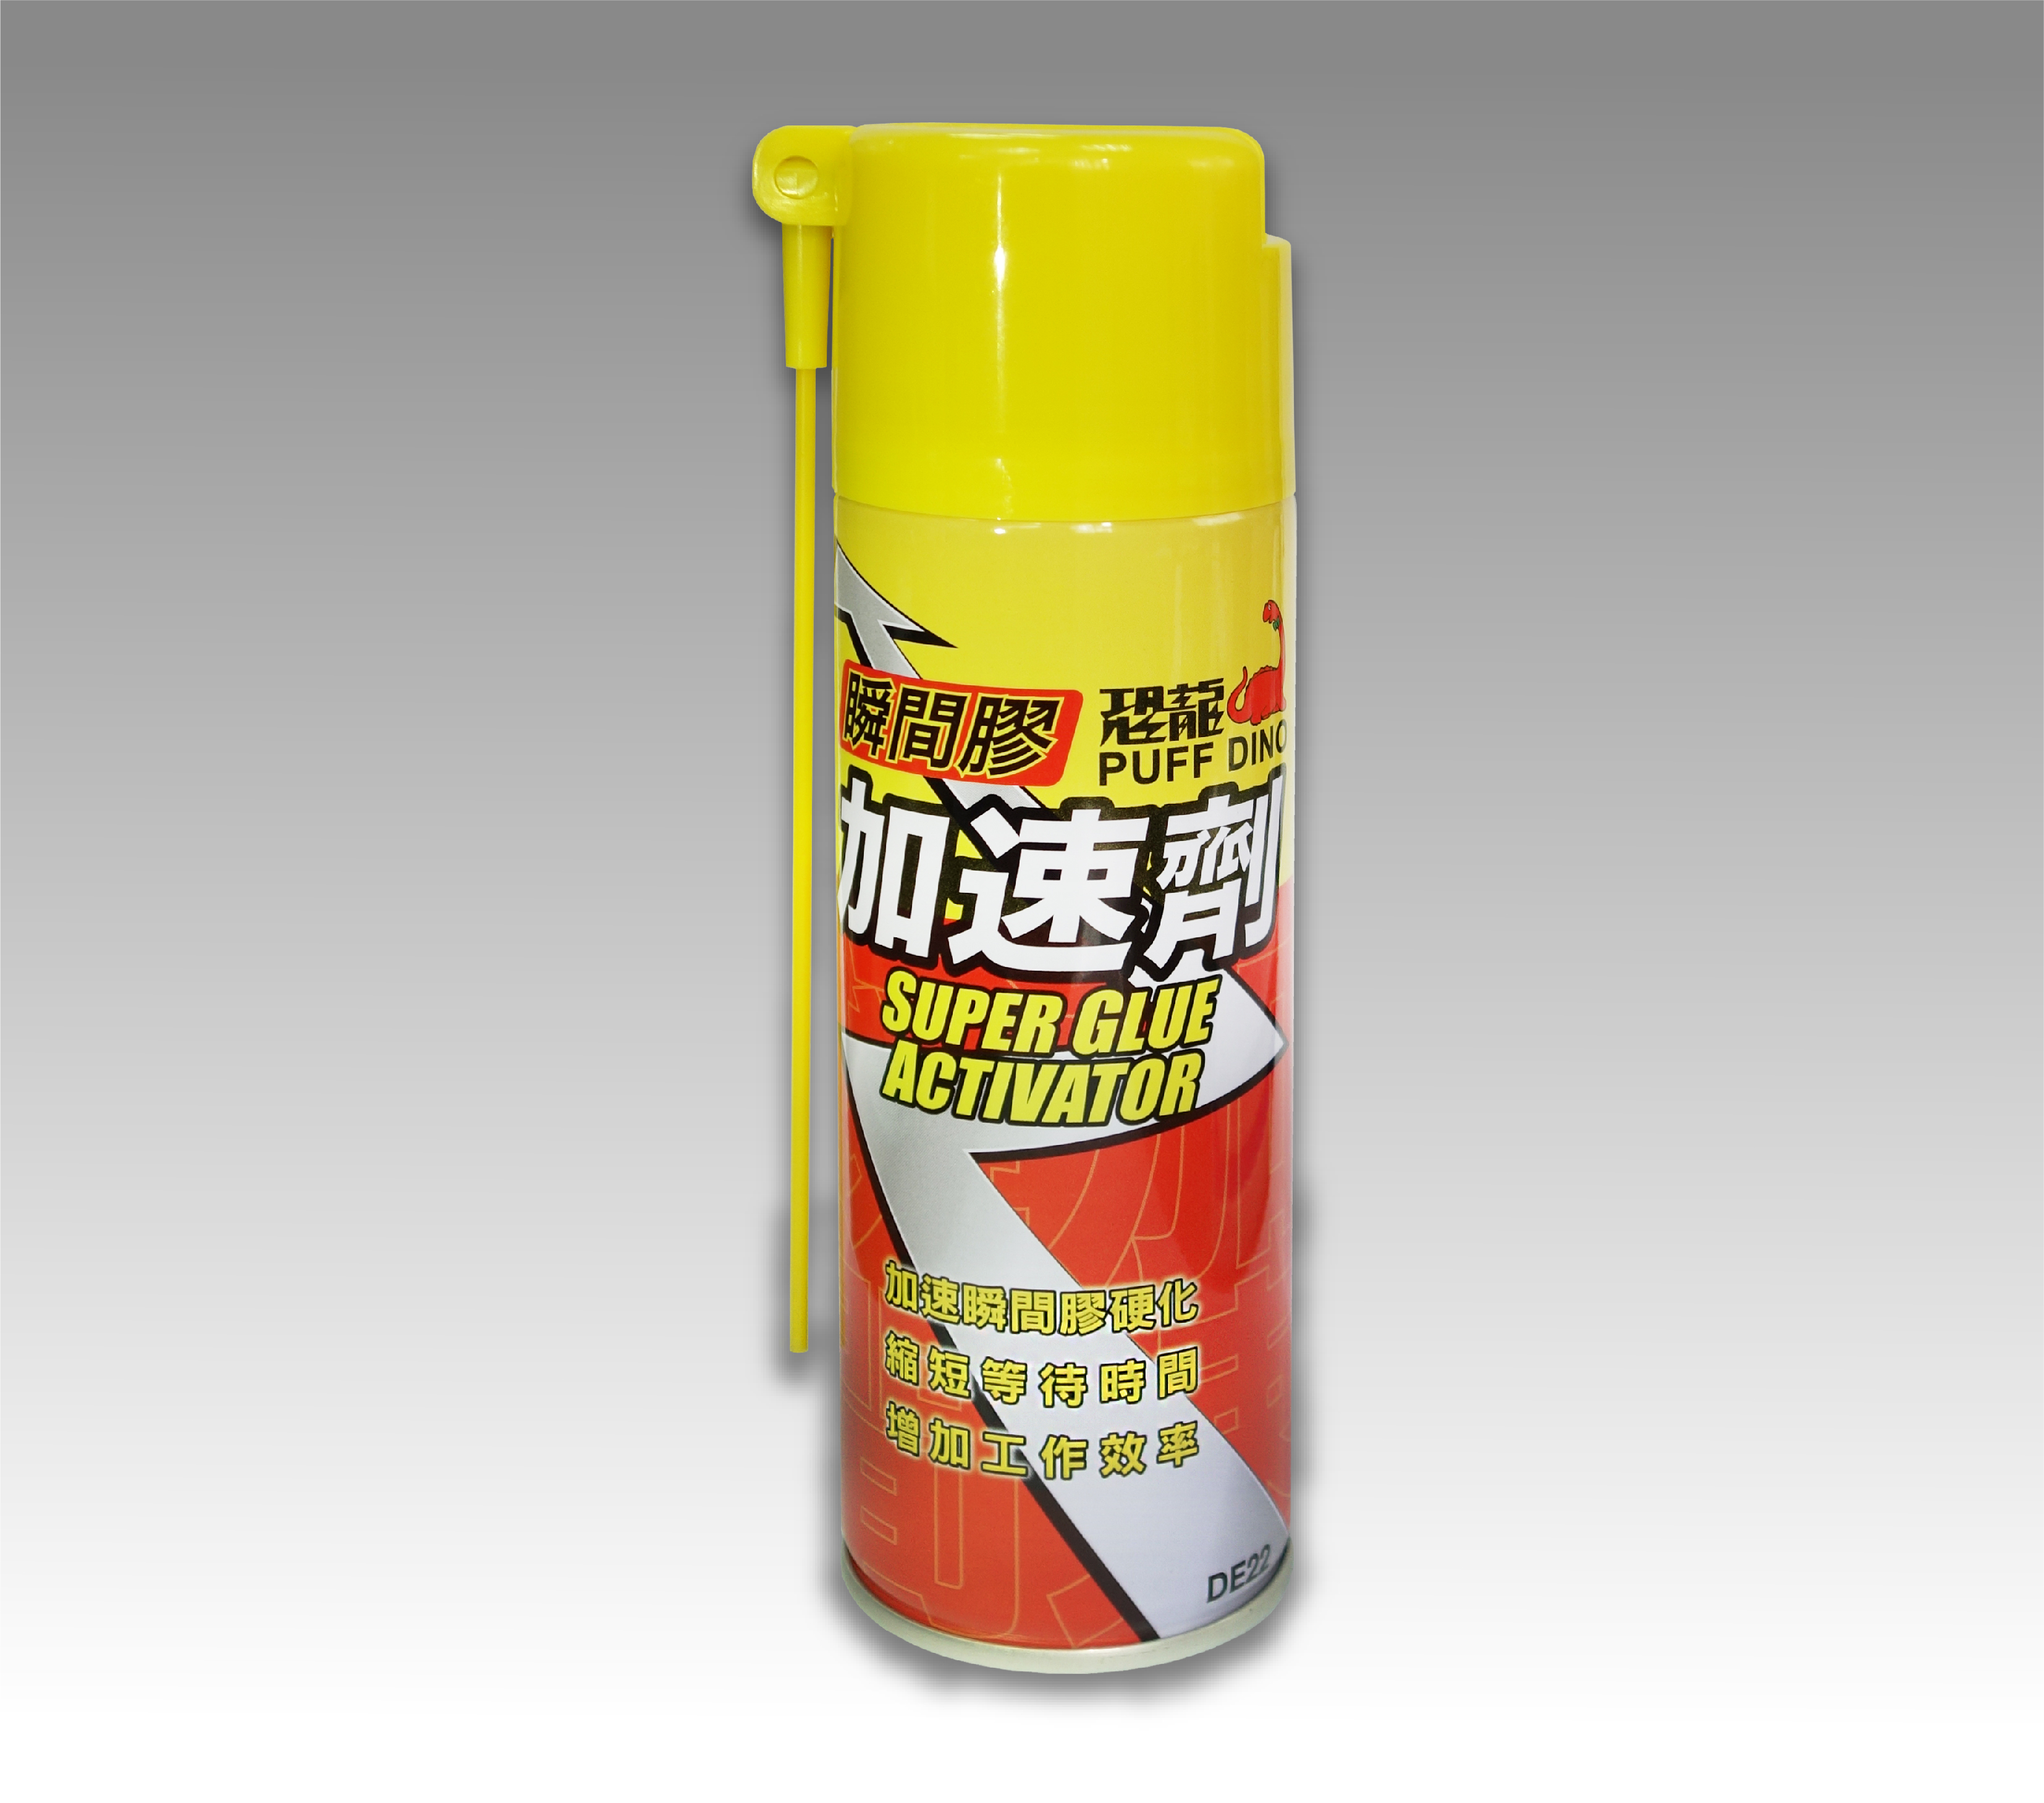 Super Glue Activator | 33 Years of High-Quality Manufacturing